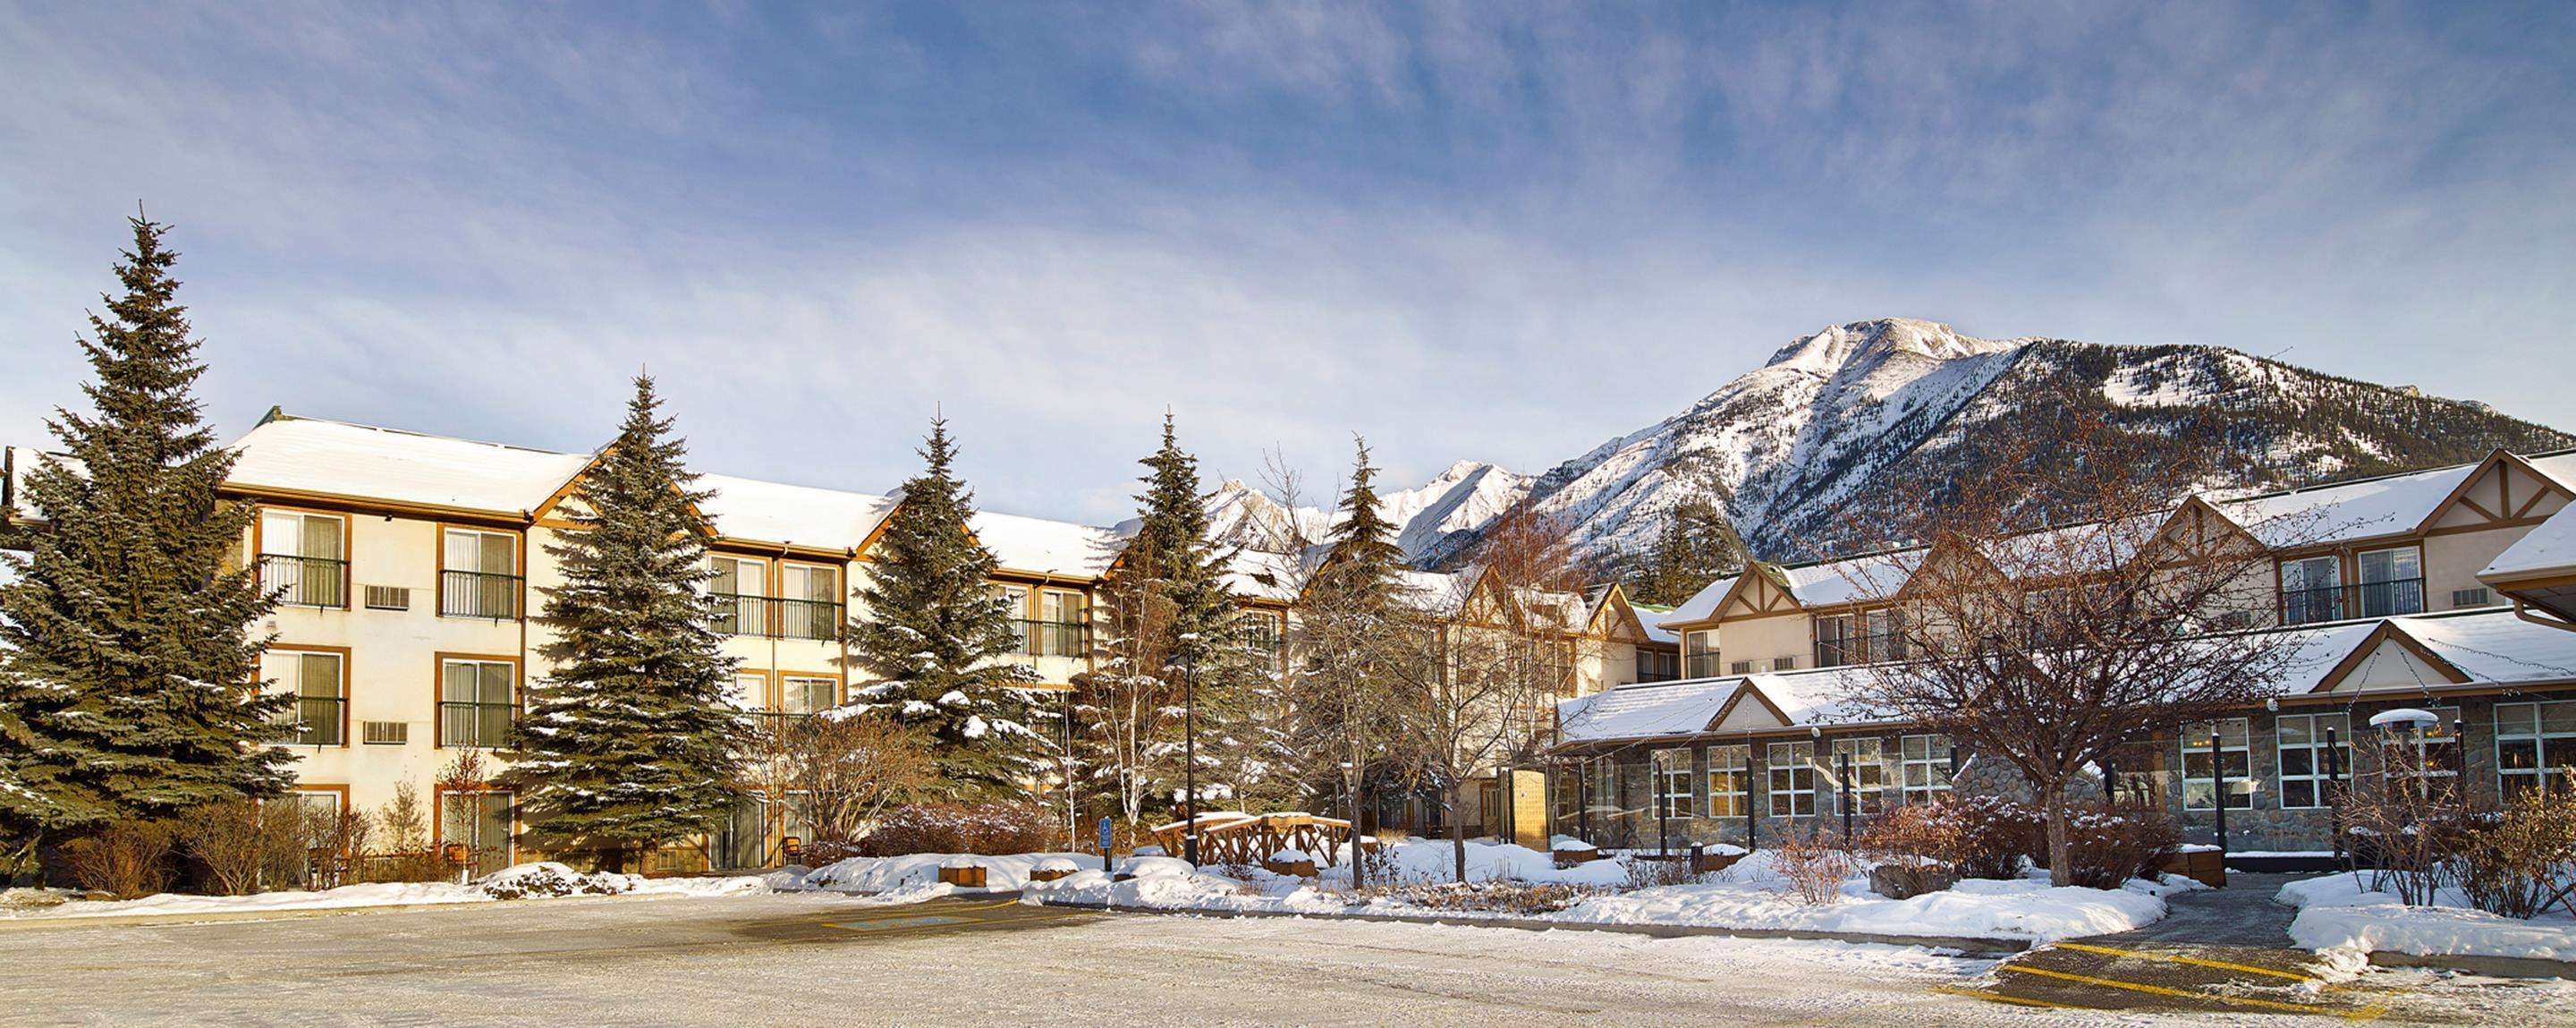 Coast Canmore Hotel & Conference Centre Exterior photo